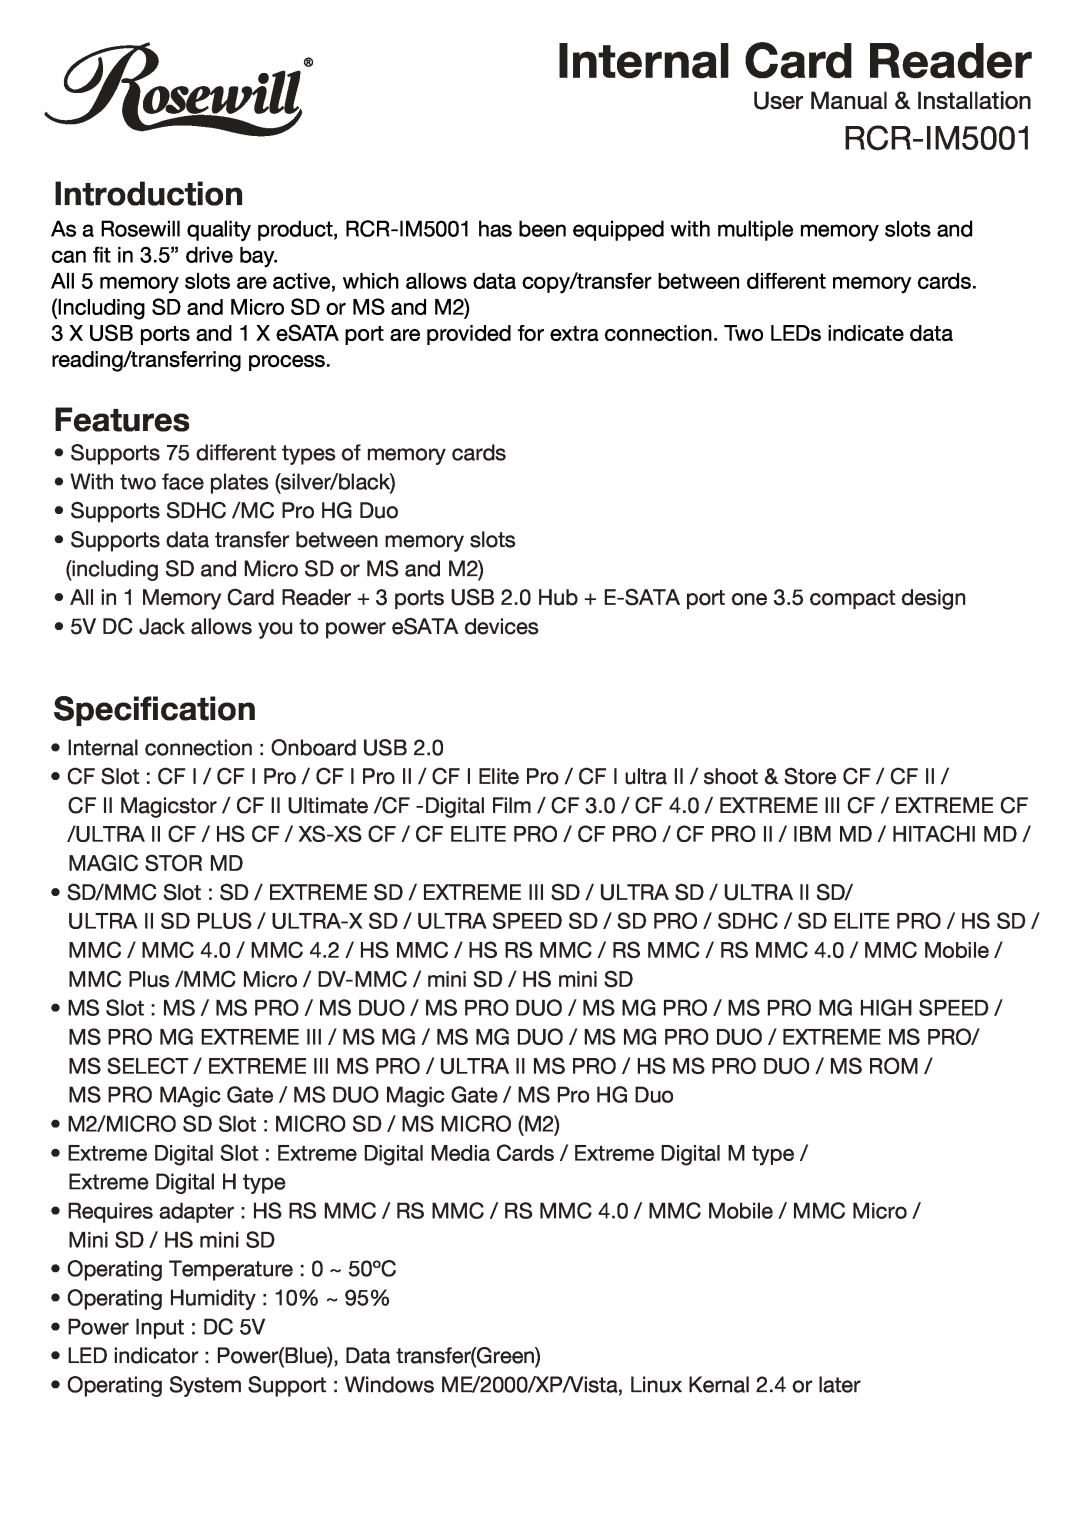 Rosewill RCR-IM5001 manual Introduction, Features, Specification 